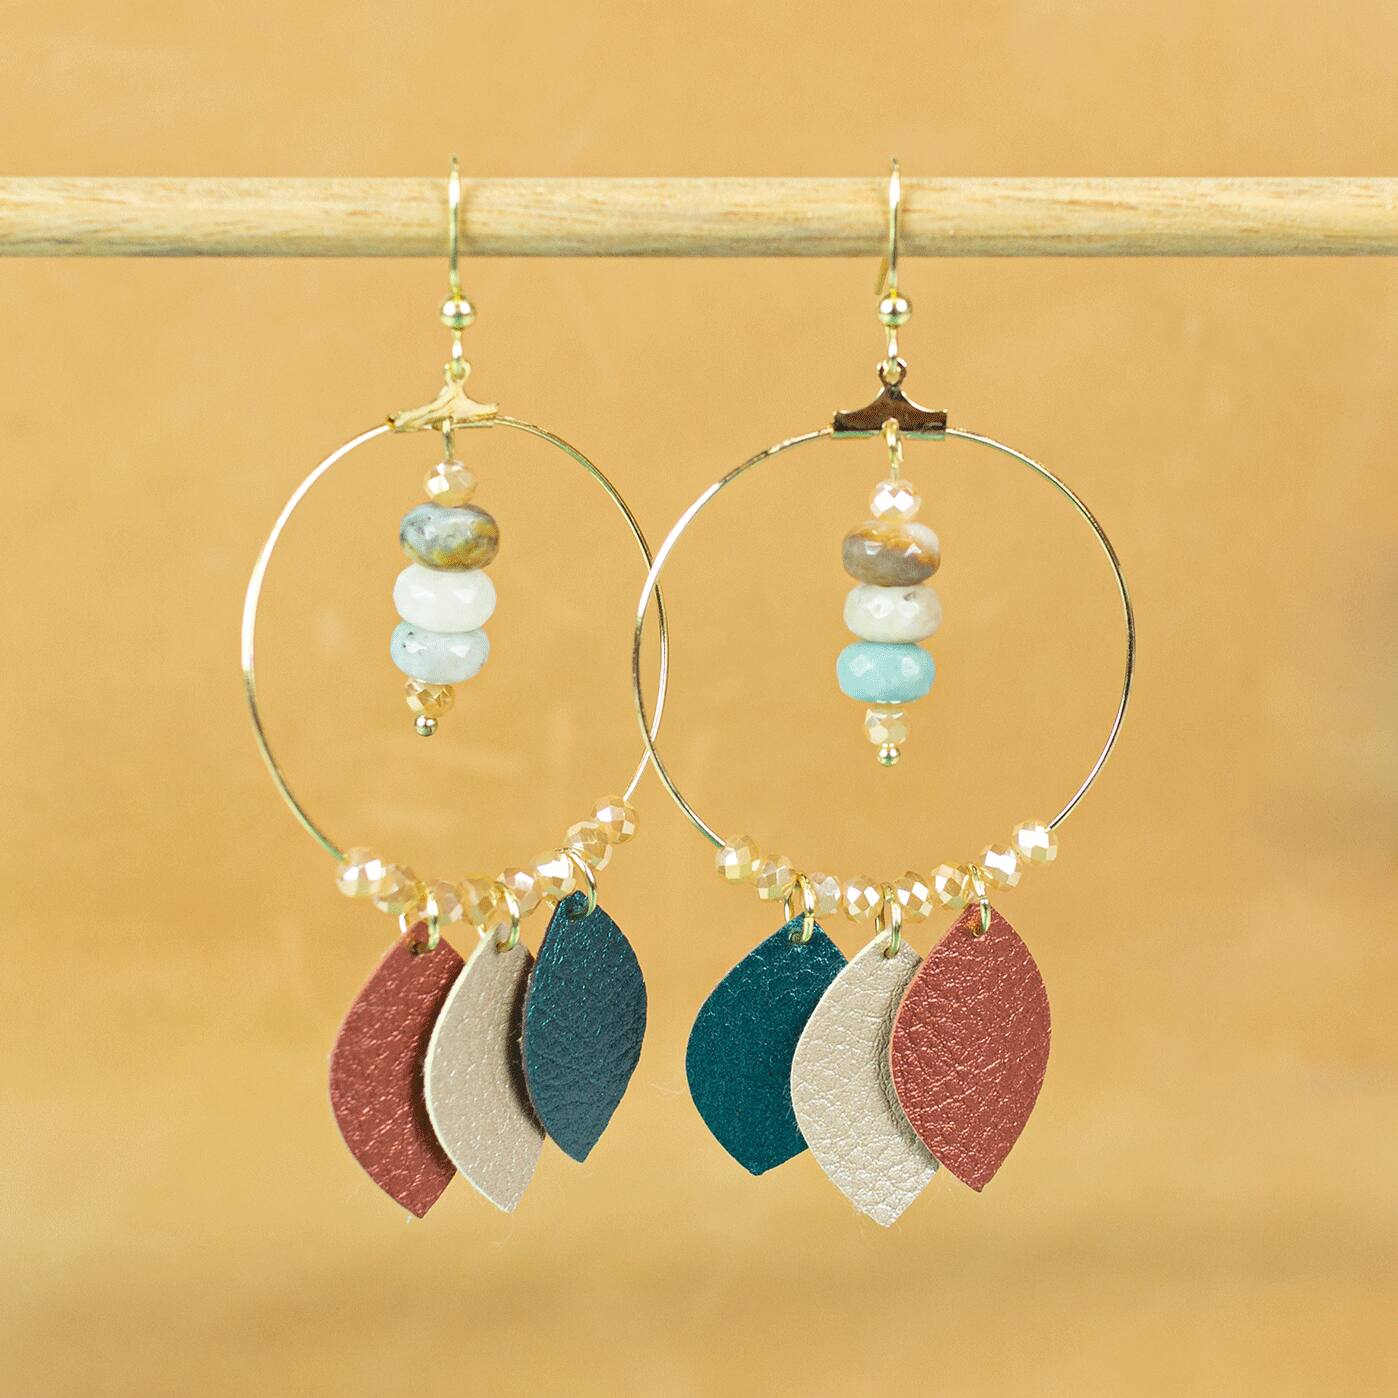 Leather and bead earrings